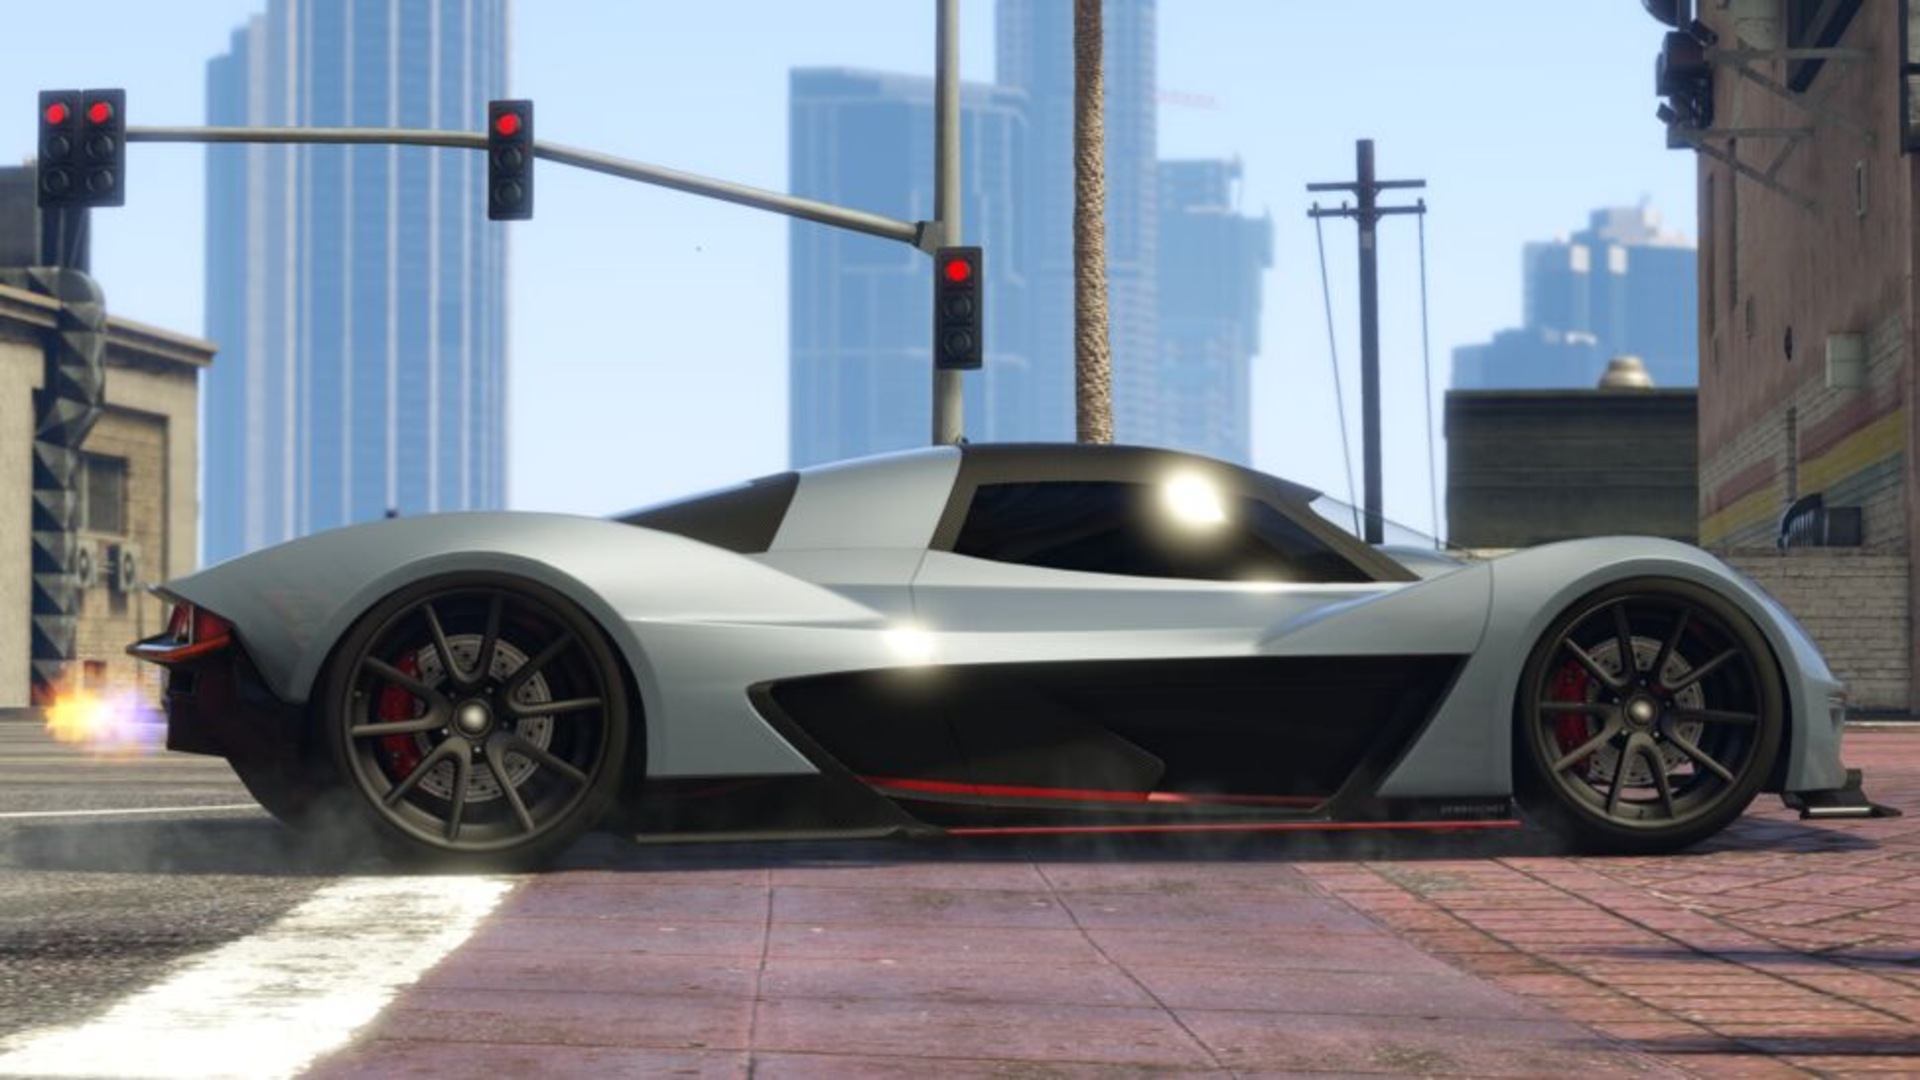 The GTA Online fastest cars for racing